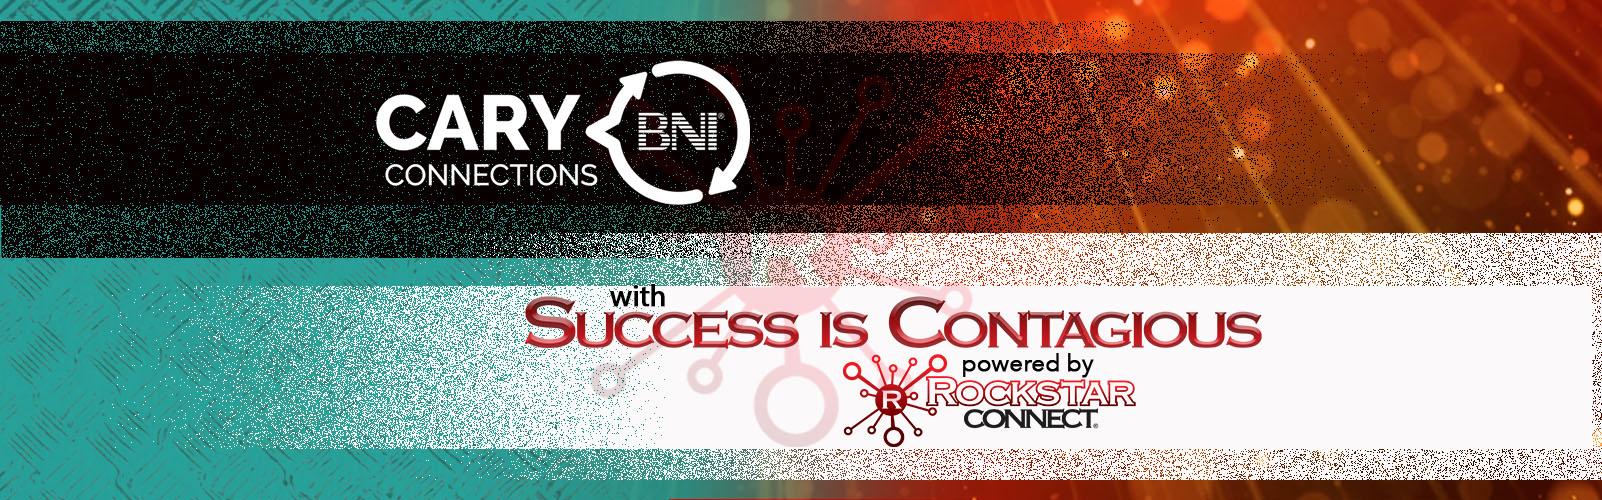 Success is Contagious - Cary Connections